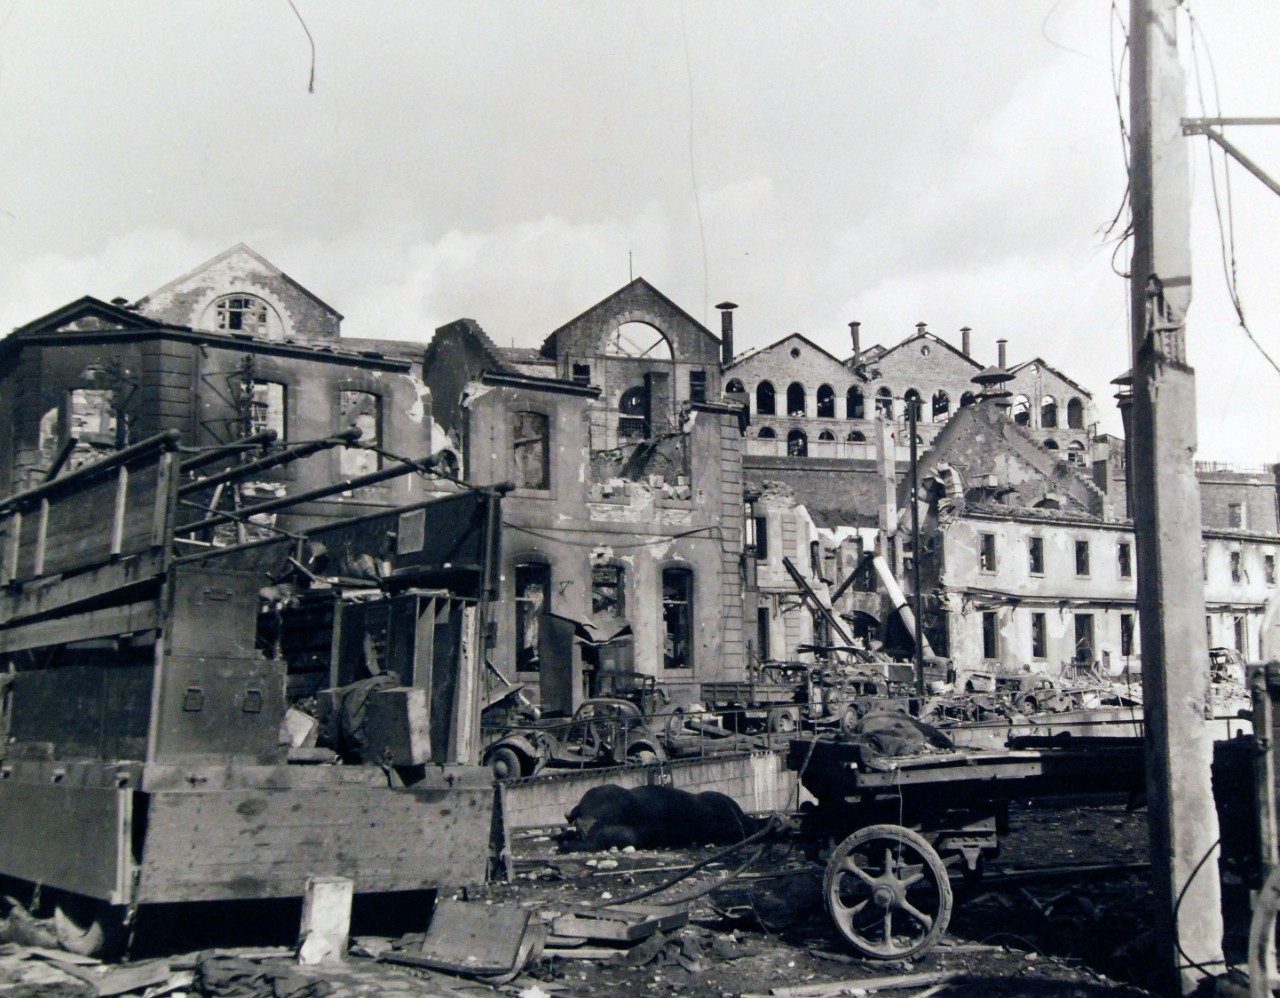 80-G-257414:   Invasion of Southern France, Brest, August-September 1944.   Allied Naval gunfire and aerial bombing of Brest, France, during the battle for the liberation of the city resulted in this devastation and wreckage.  In the foreground is a wrecked work ship truck used by Germans for a mobile repair unit, 5 October 1944.  Official U.S. Navy Photograph, now in the collections of the National Archives.   (2014/10/28).